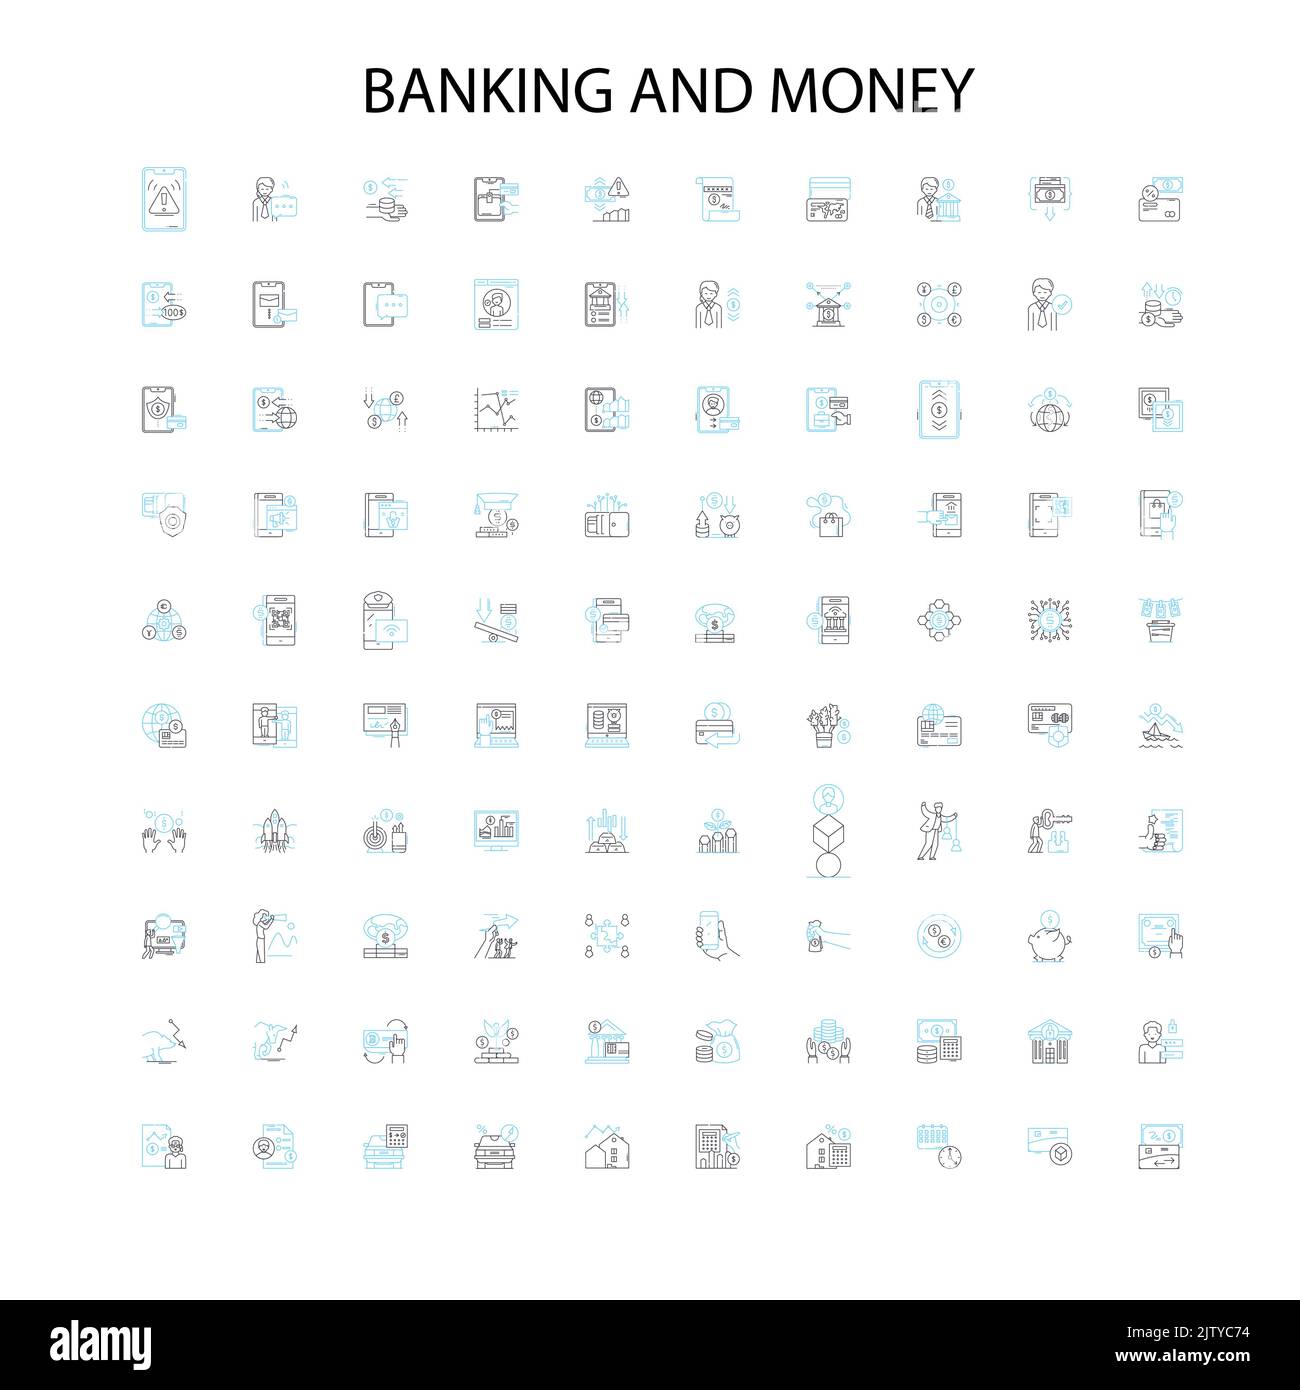 banking and money icons, signs, outline symbols, concept linear illustration line collection Stock Vector